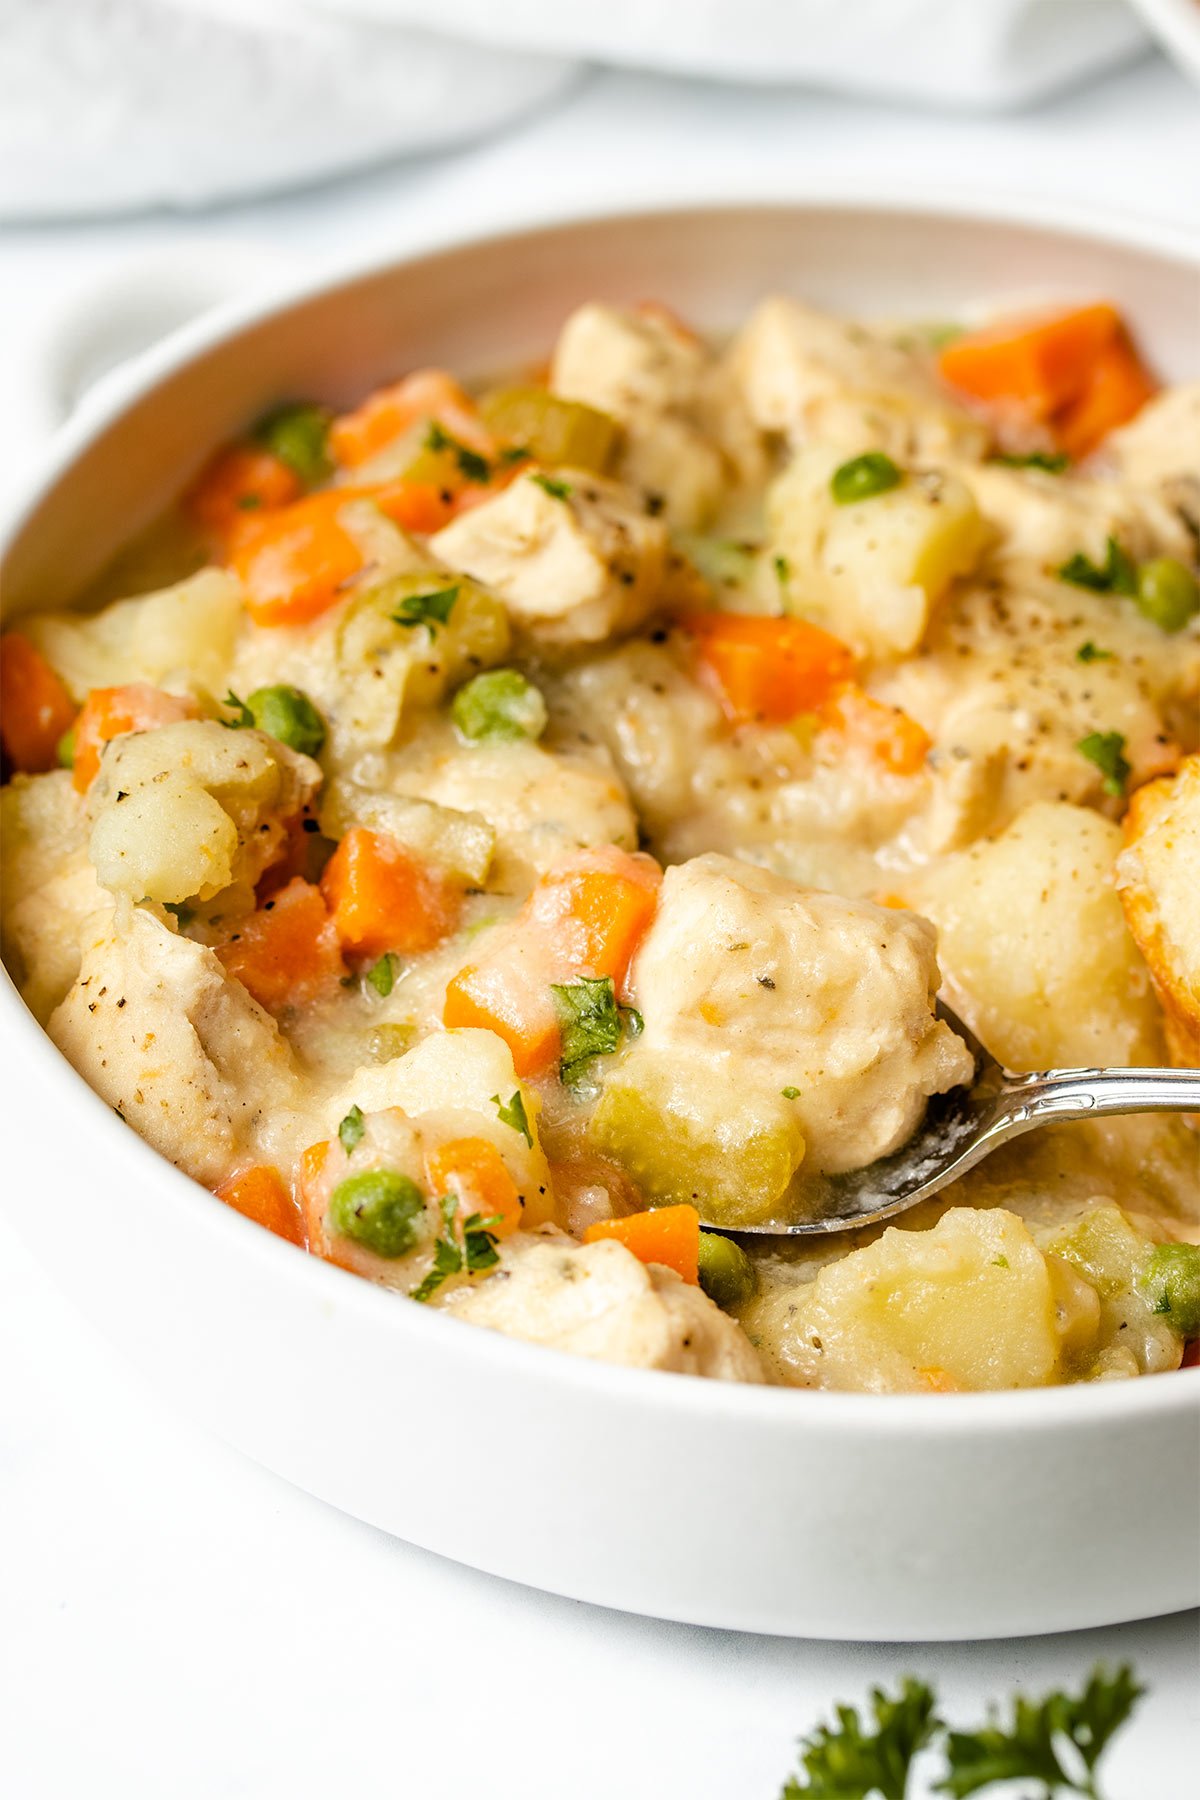 Instant Pot Chicken Pot Pie The Recipe Well,Bathroom Decorating Ideas On A Budget